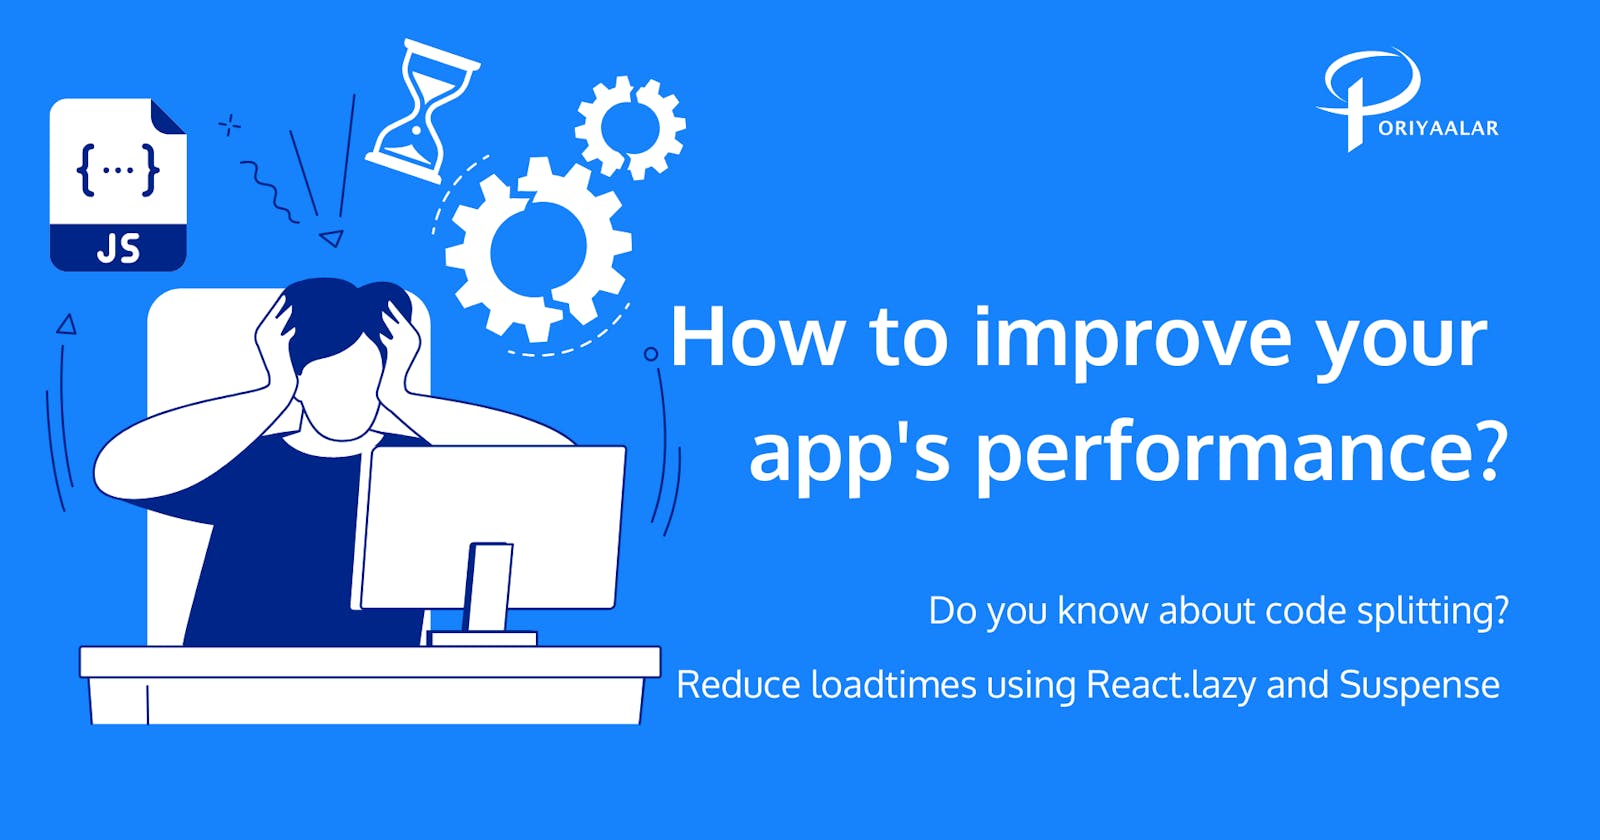 How to improve your app's performance?